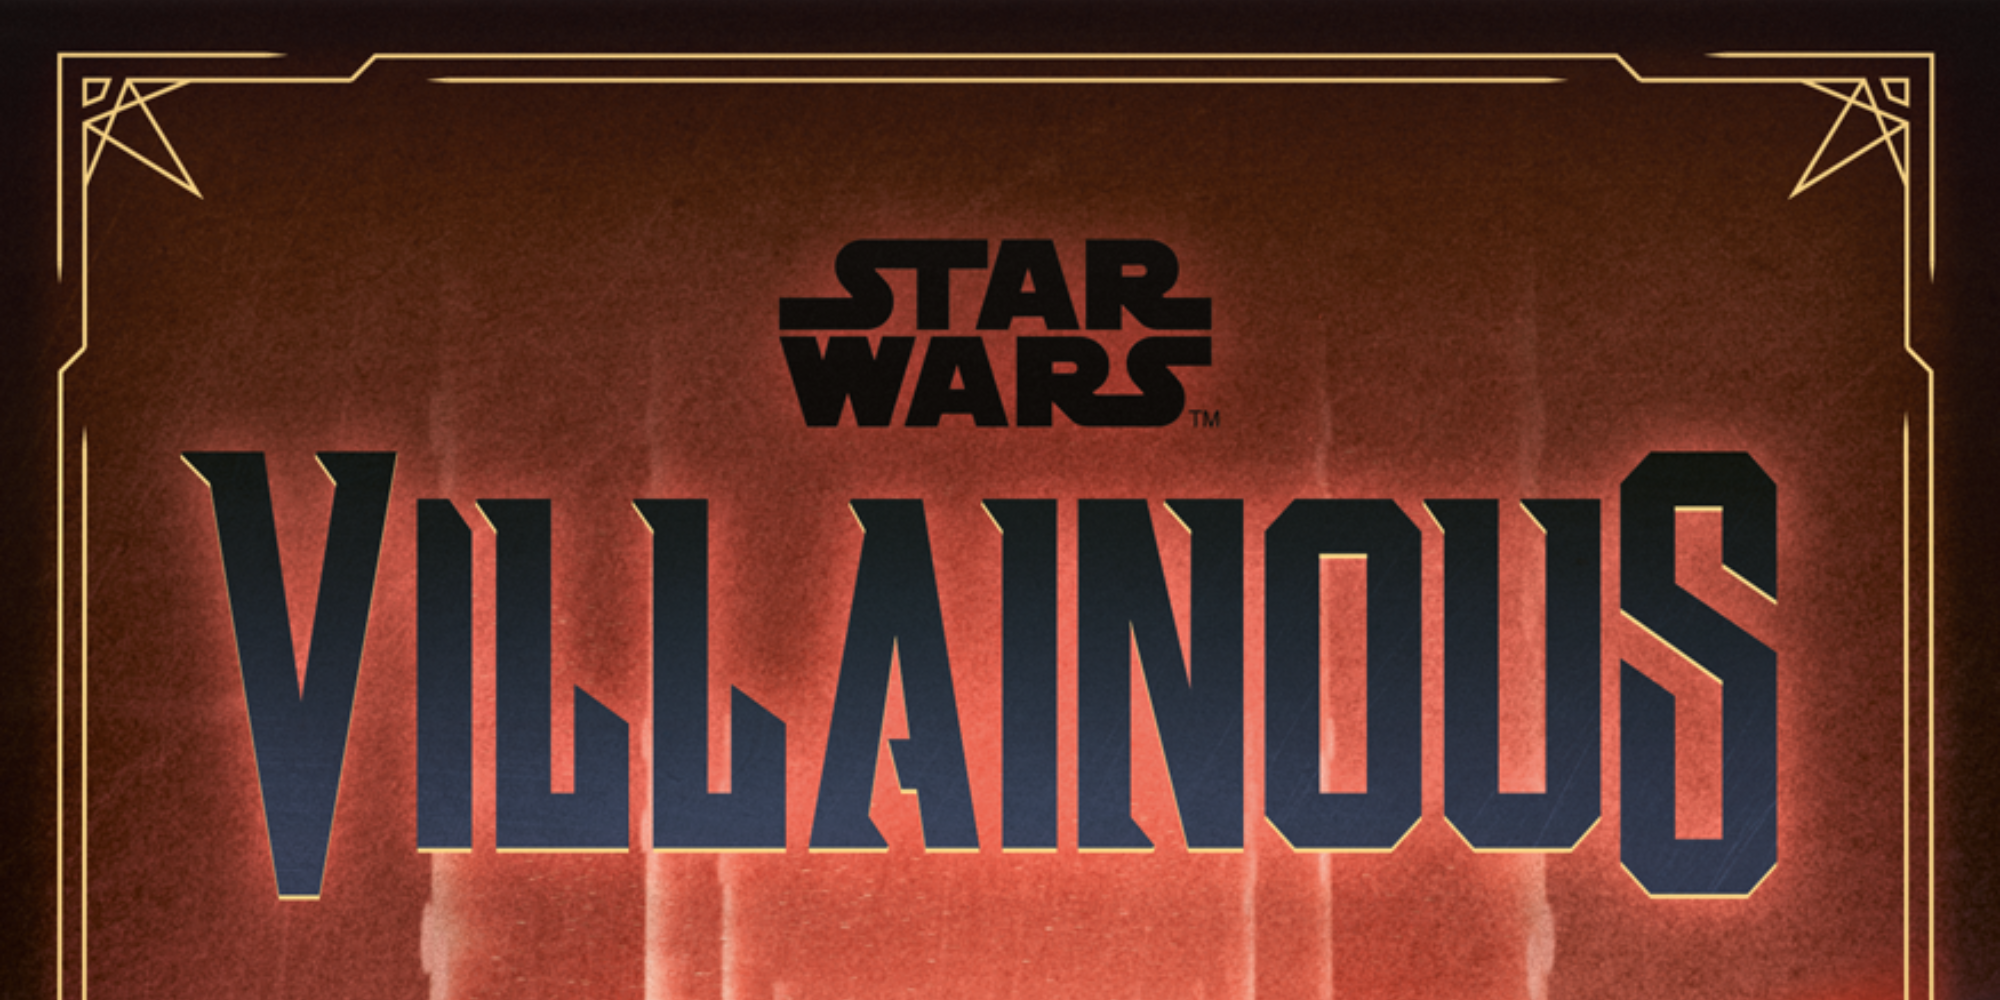 Star Wars Villainous Expandalone Characters Announced by Ravensburger